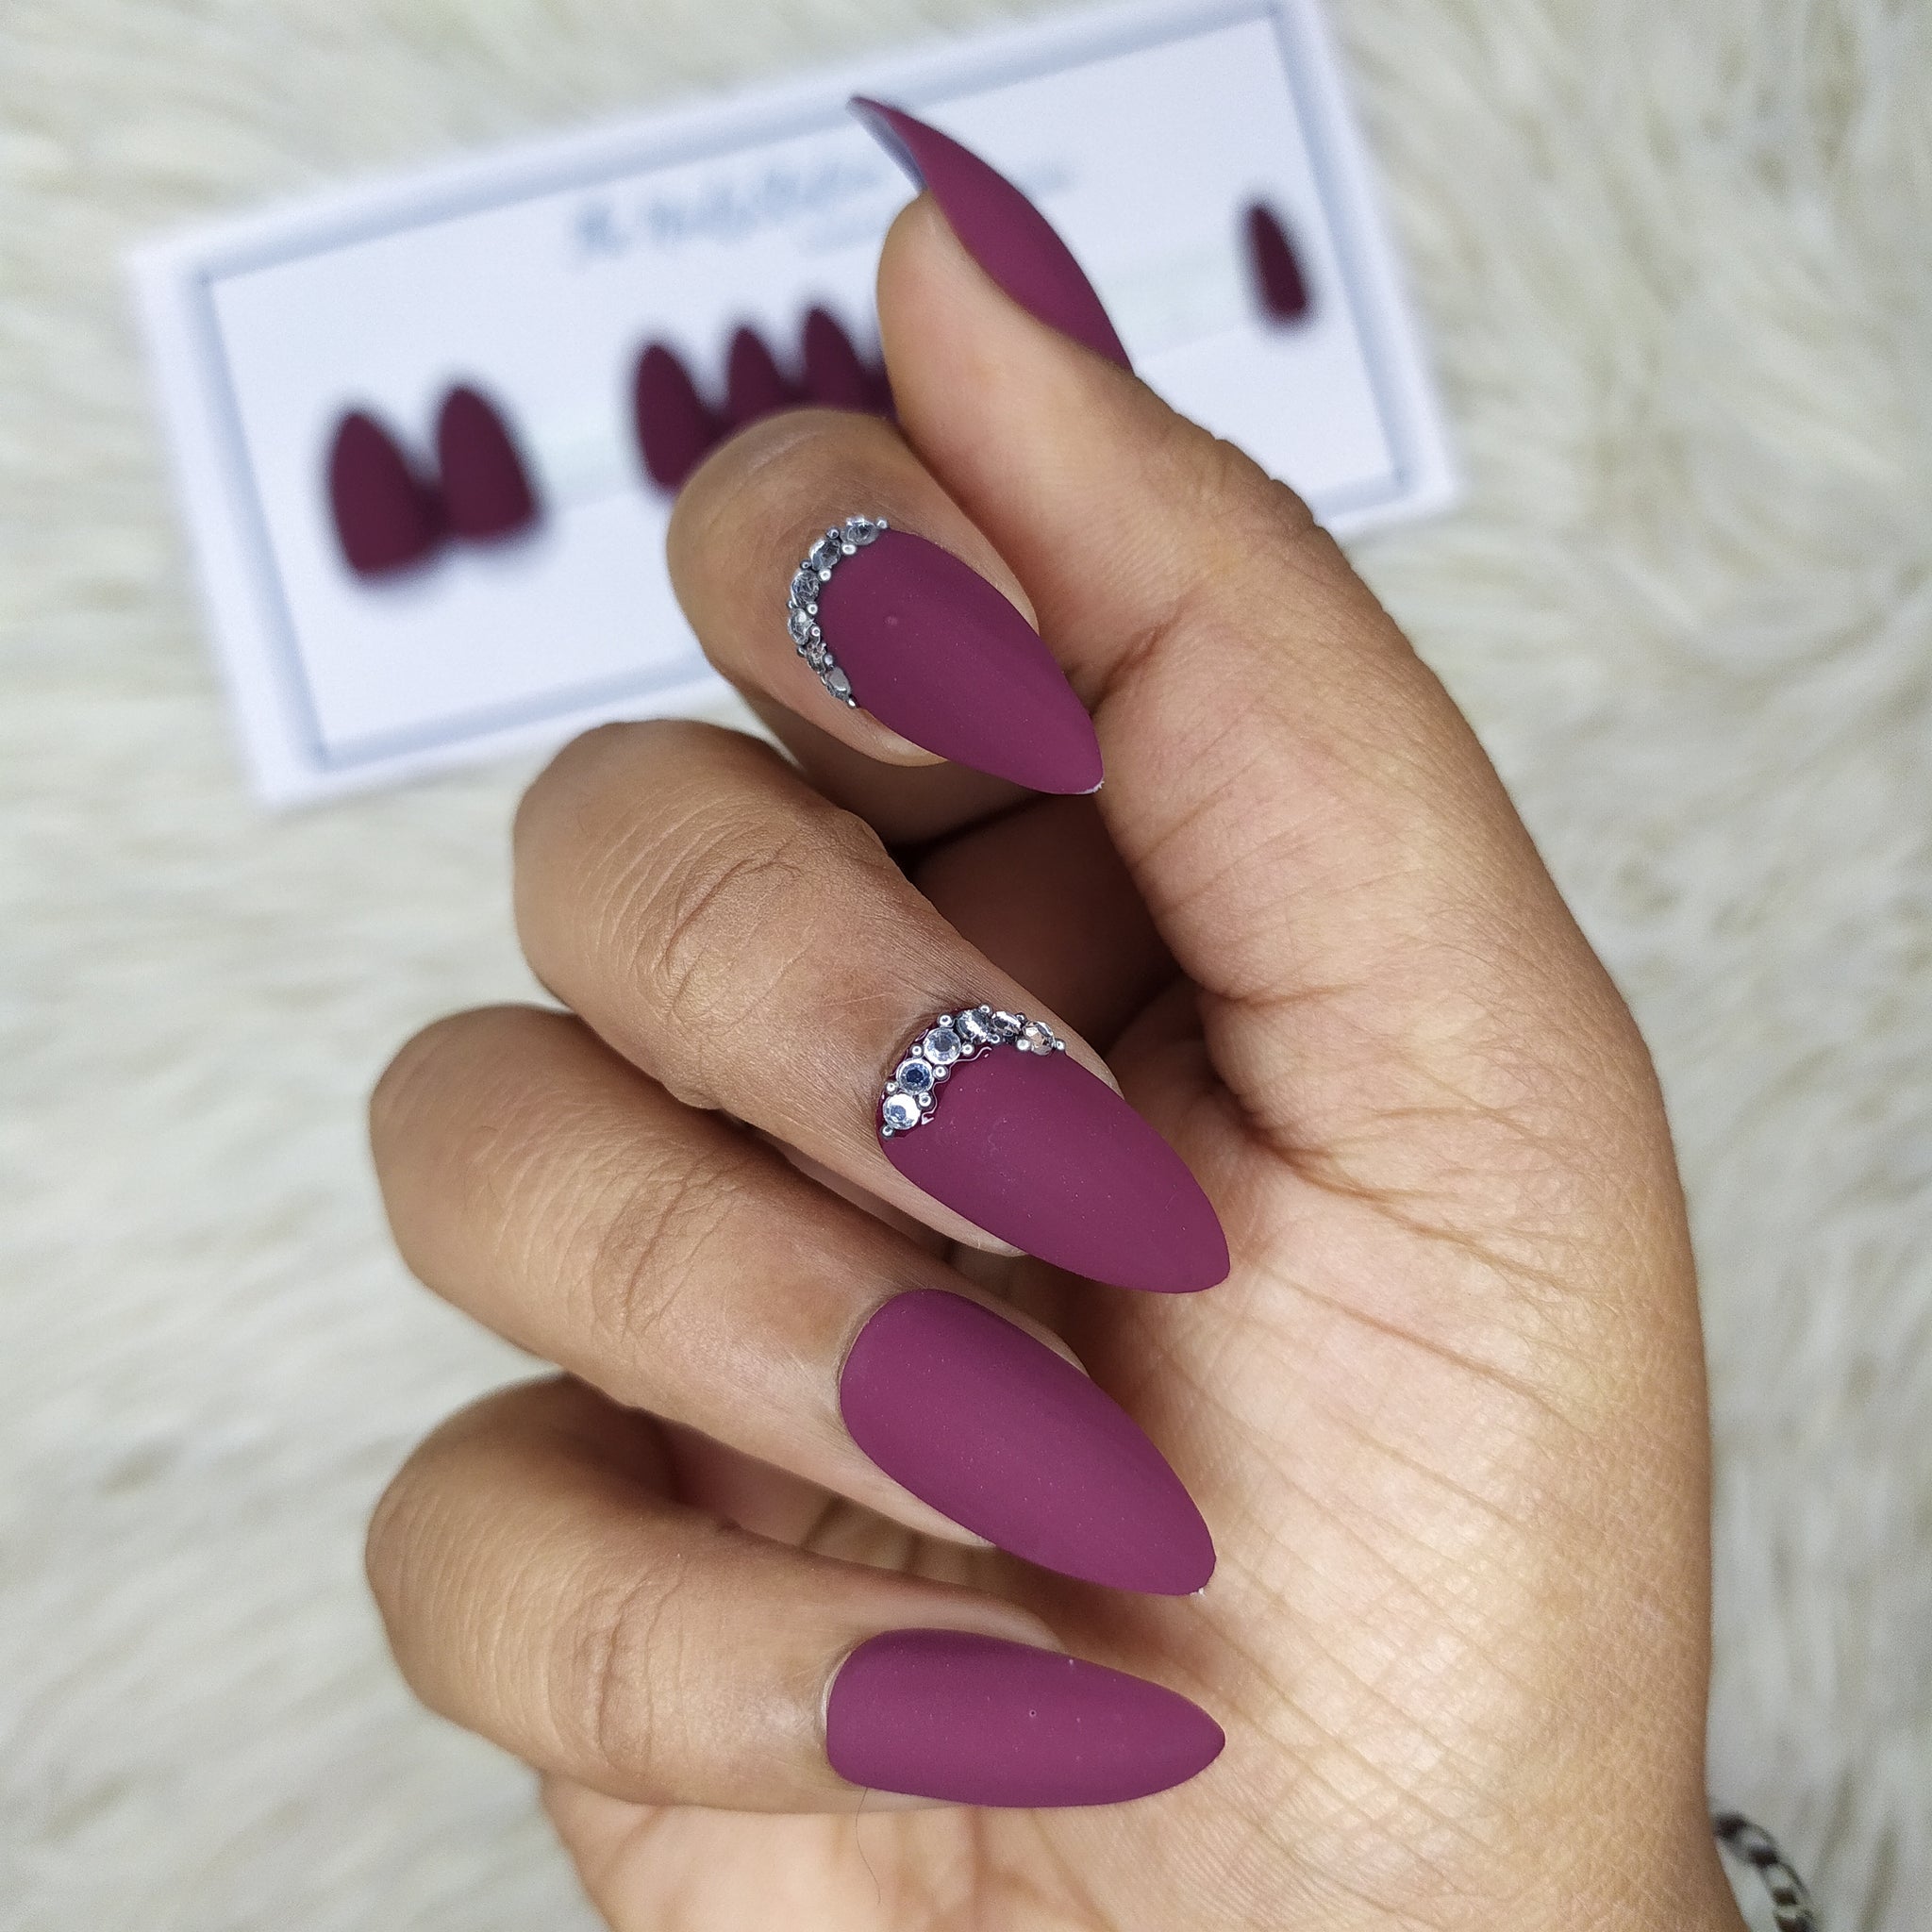 ROZIA Artificial Nails Matte Finish False Nails Long Tips Rich Color Nail  Full Cover Nail Extensions Artificial DIY Nail Art Accessories Purple,  White - Price in India, Buy ROZIA Artificial Nails Matte